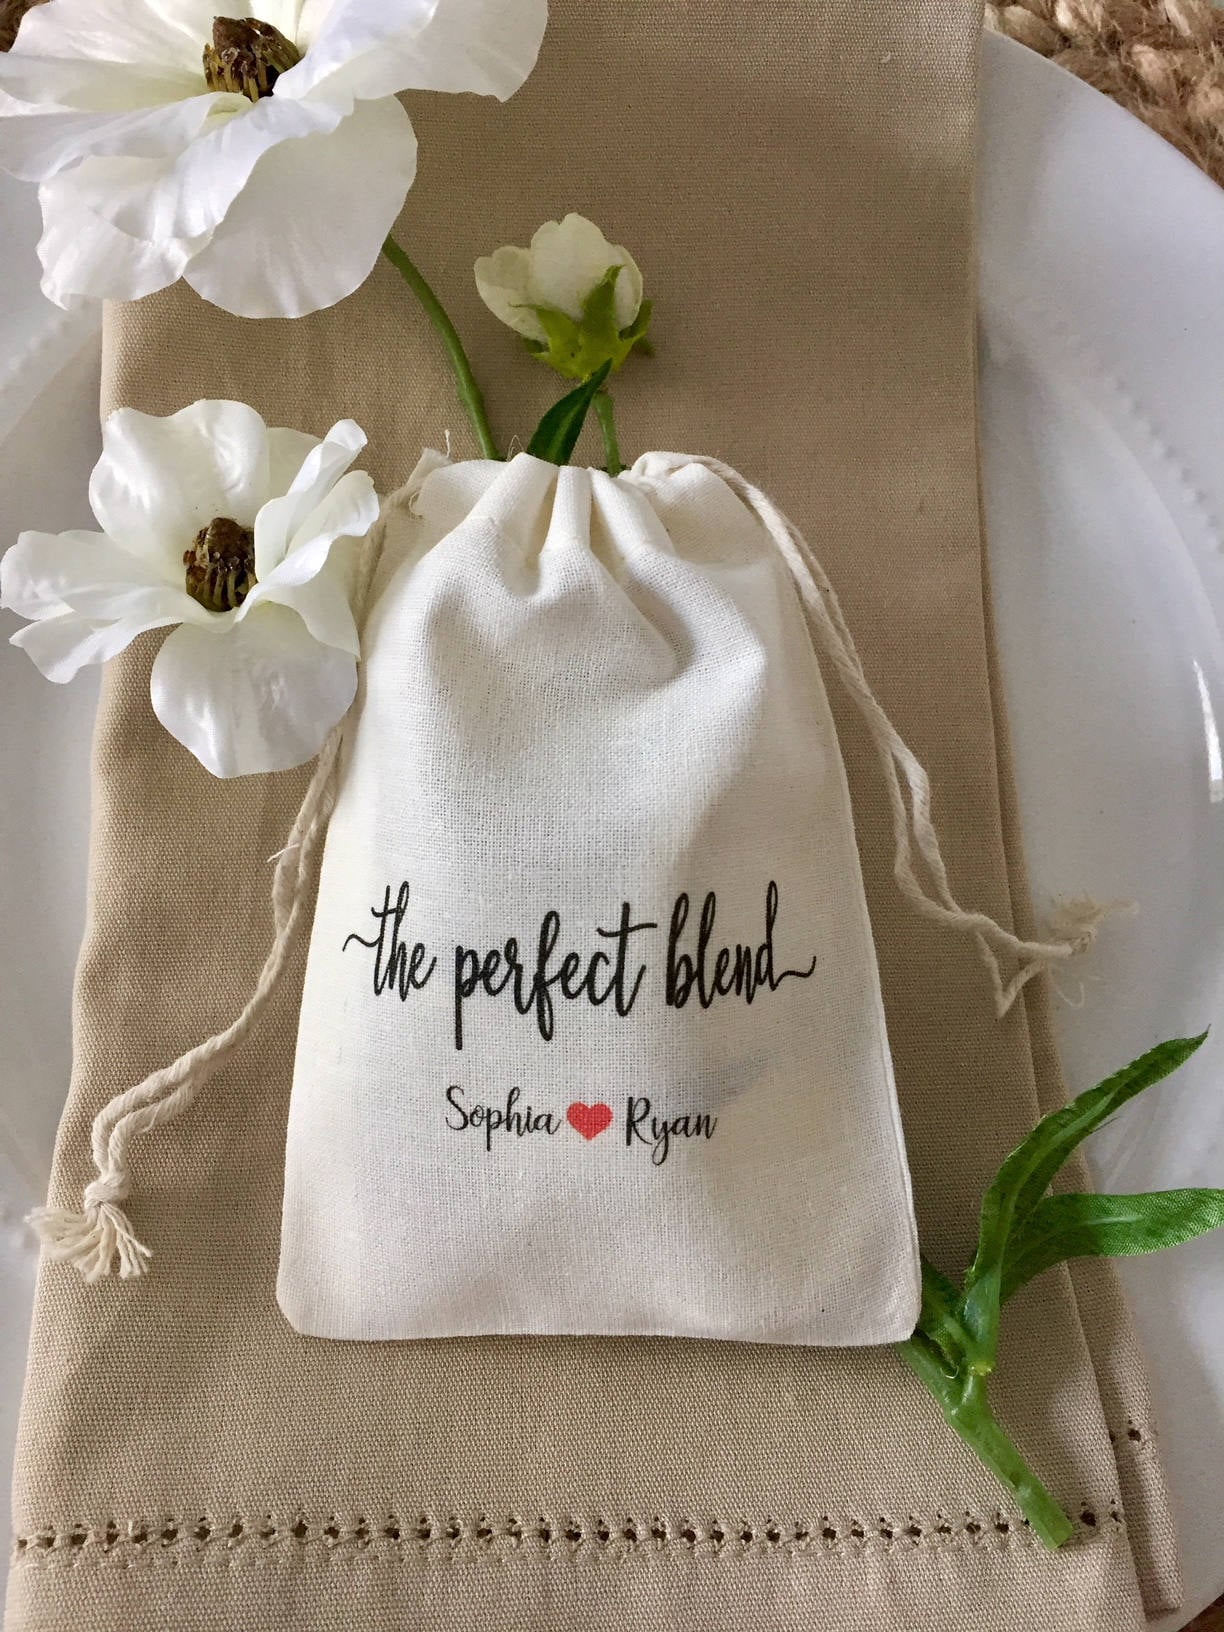 3 Ideas for Personalized Wedding Favors